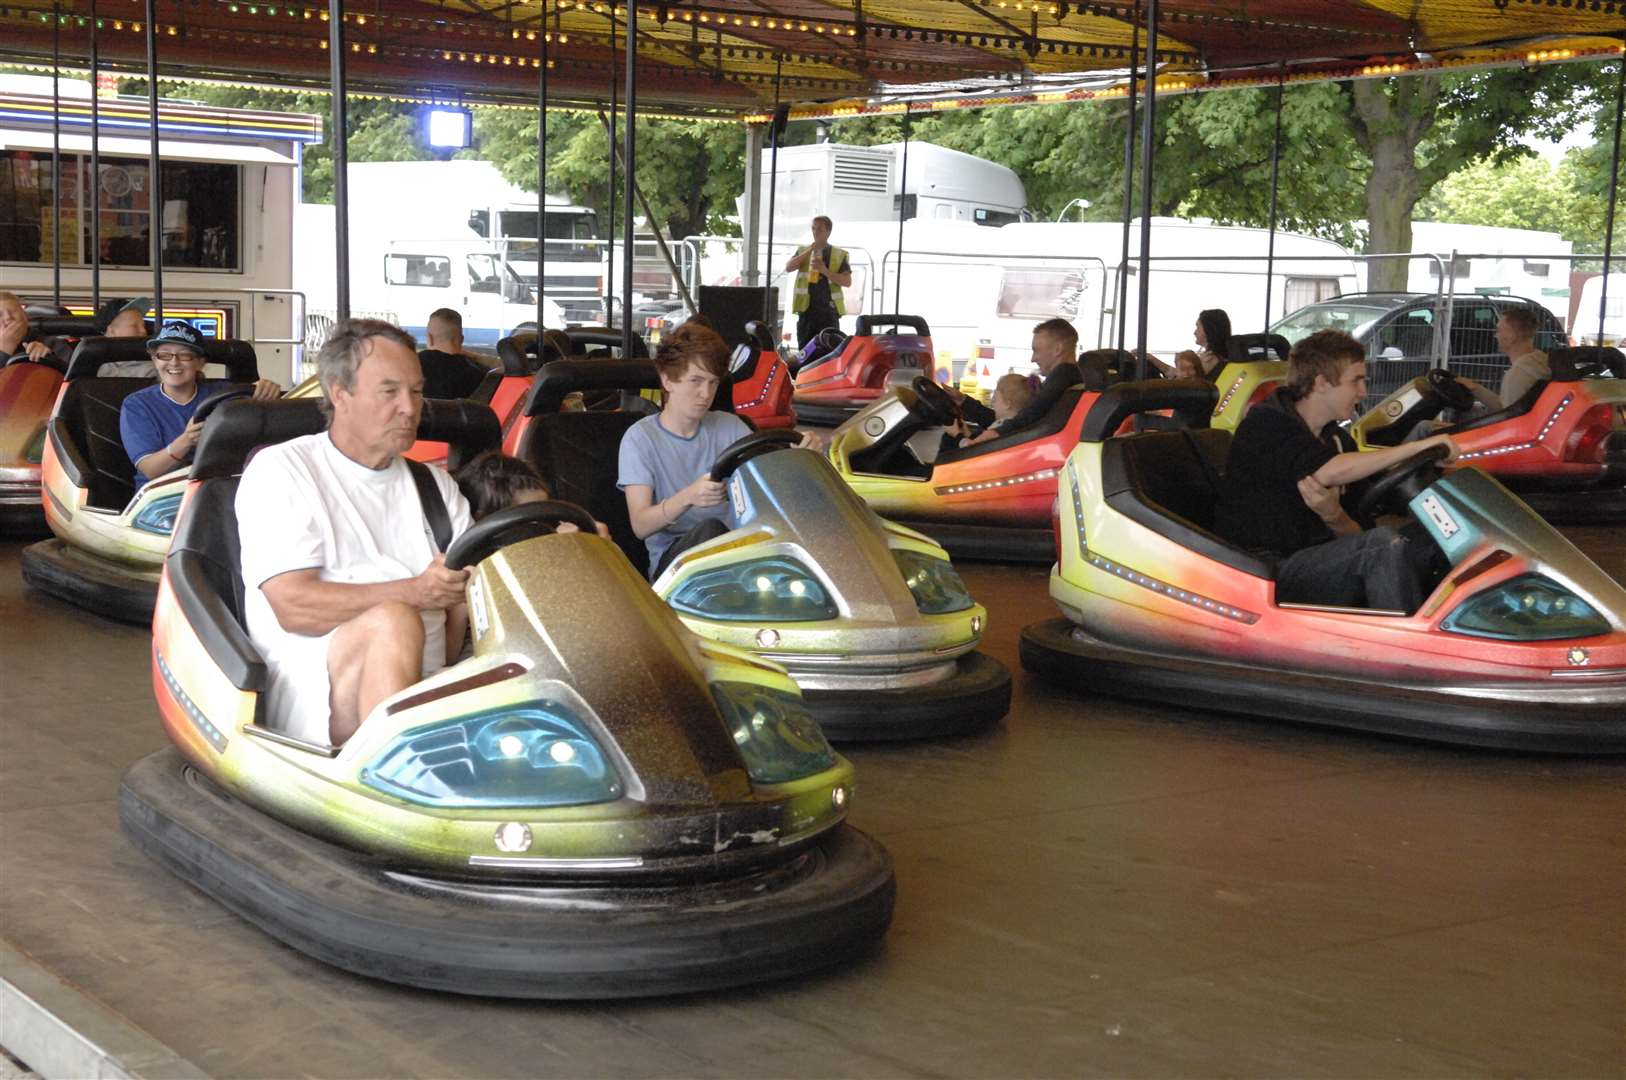 Dodgems at the funfair in Memmorial Park in August, 2013